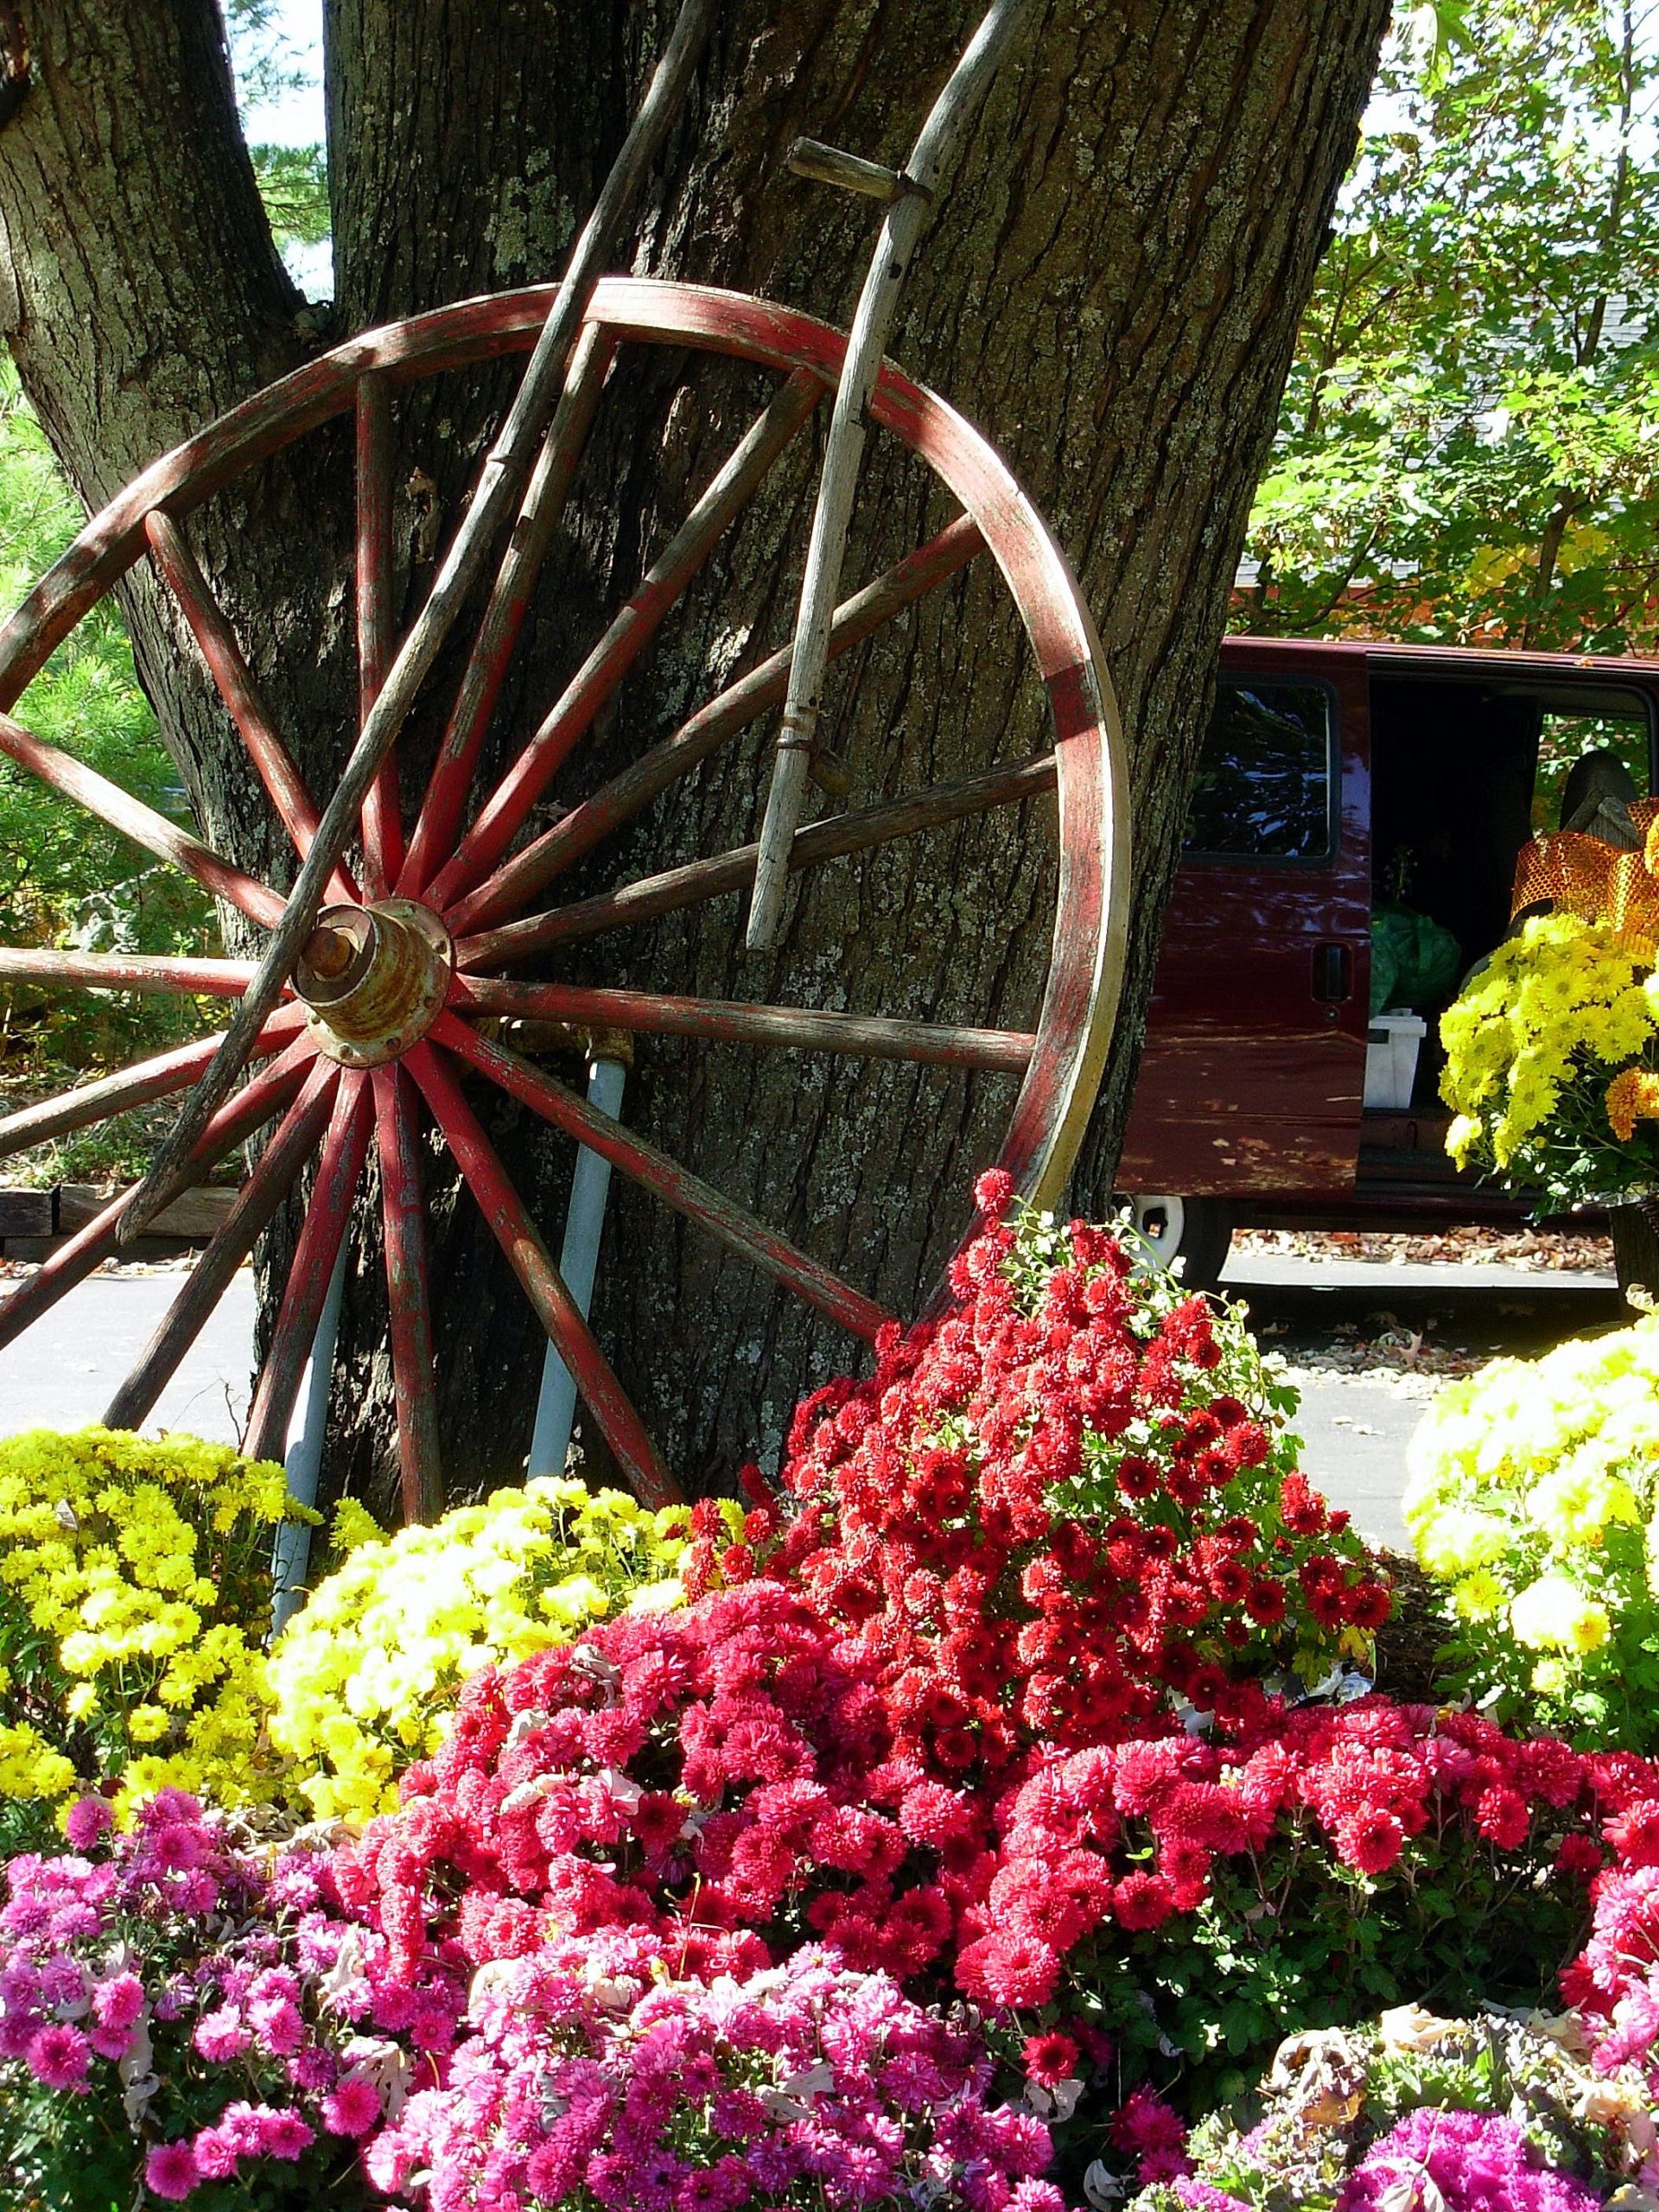 Wagon Wheel and Mums (user submitted)